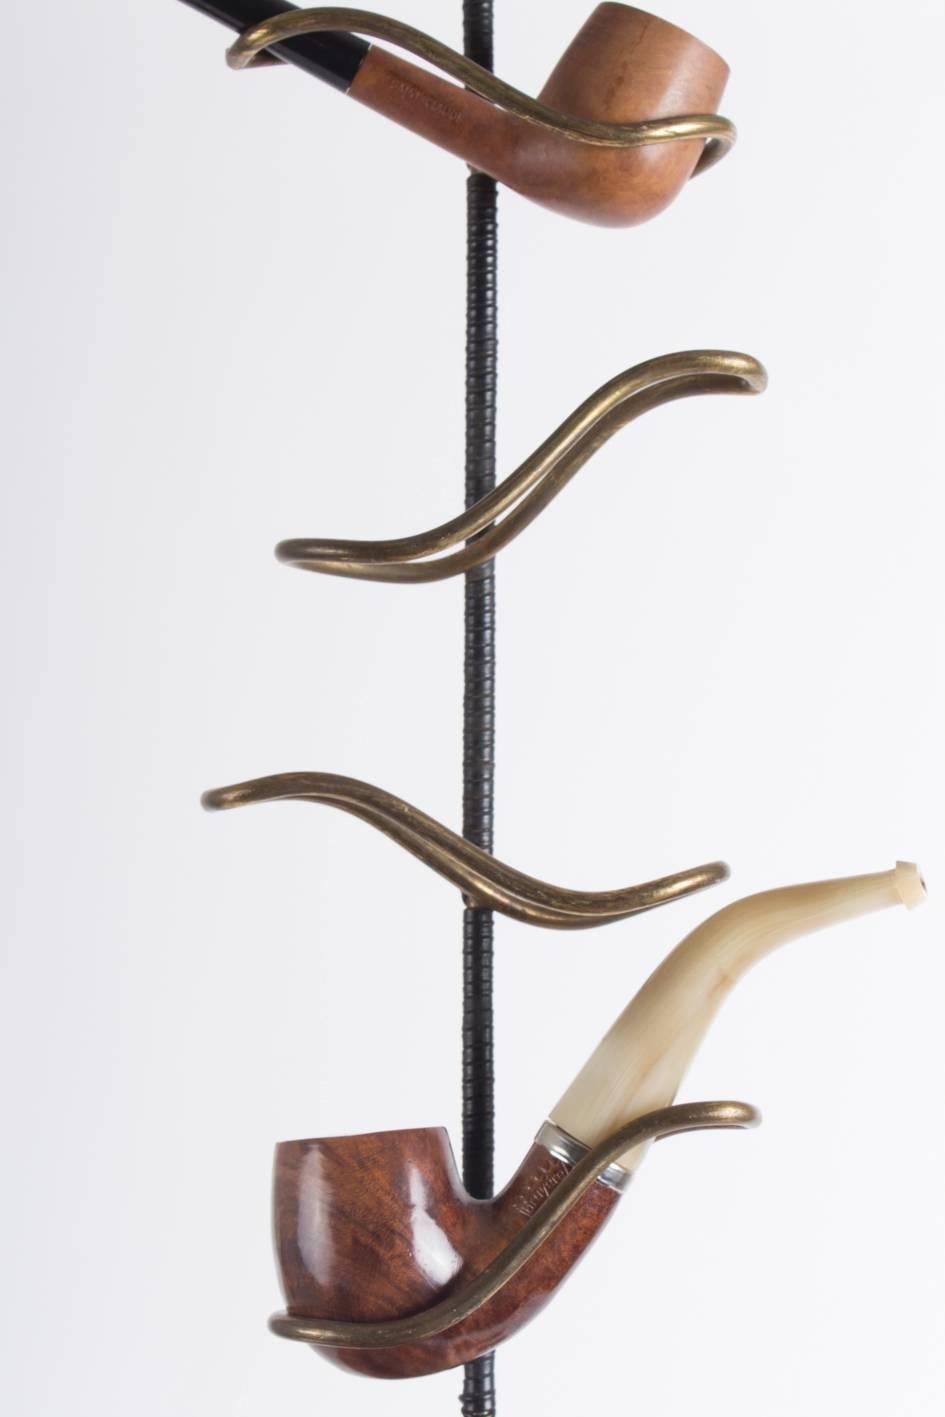 This Midcentury pipe holder is made of wrapped leather and brass with striking similarities to similar pieces by the infamous workshop of Carl Auböck in Vienna.

The pipes can be part of any purchase but are not automatically included.